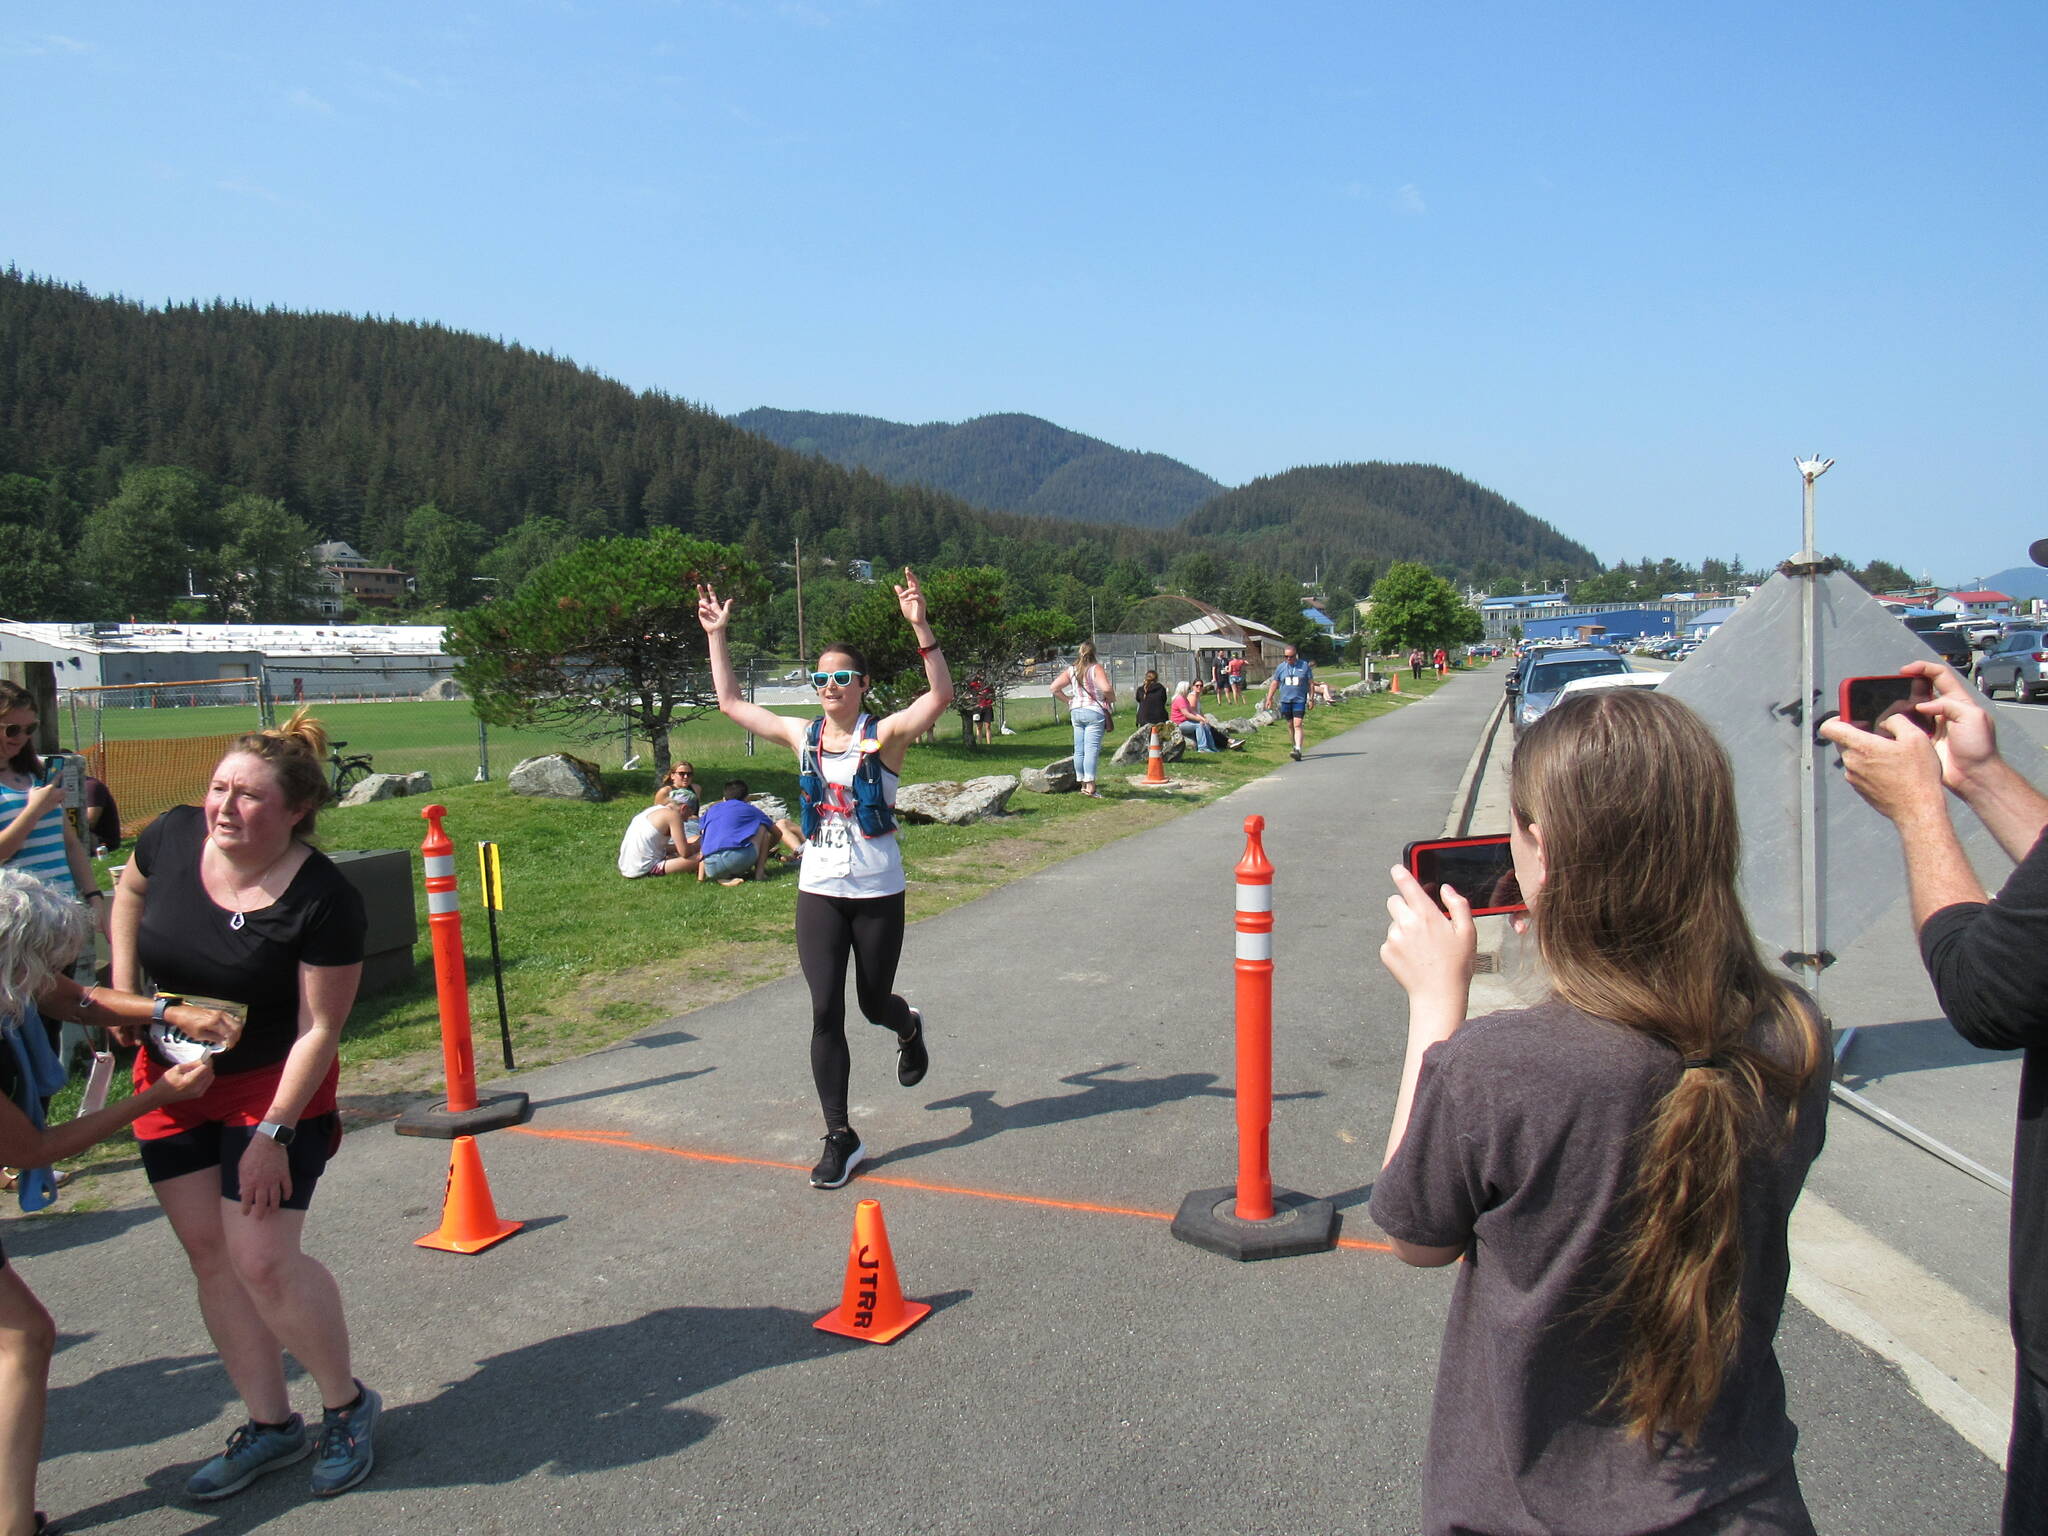 Kristin Campbell, of Deer Park, Ohio, is photographed by observers at the finish line of the Juneau Half Marathon on Saturday at Savikko Park. (Photo courtesy of Juneau Trail and Road Runners)